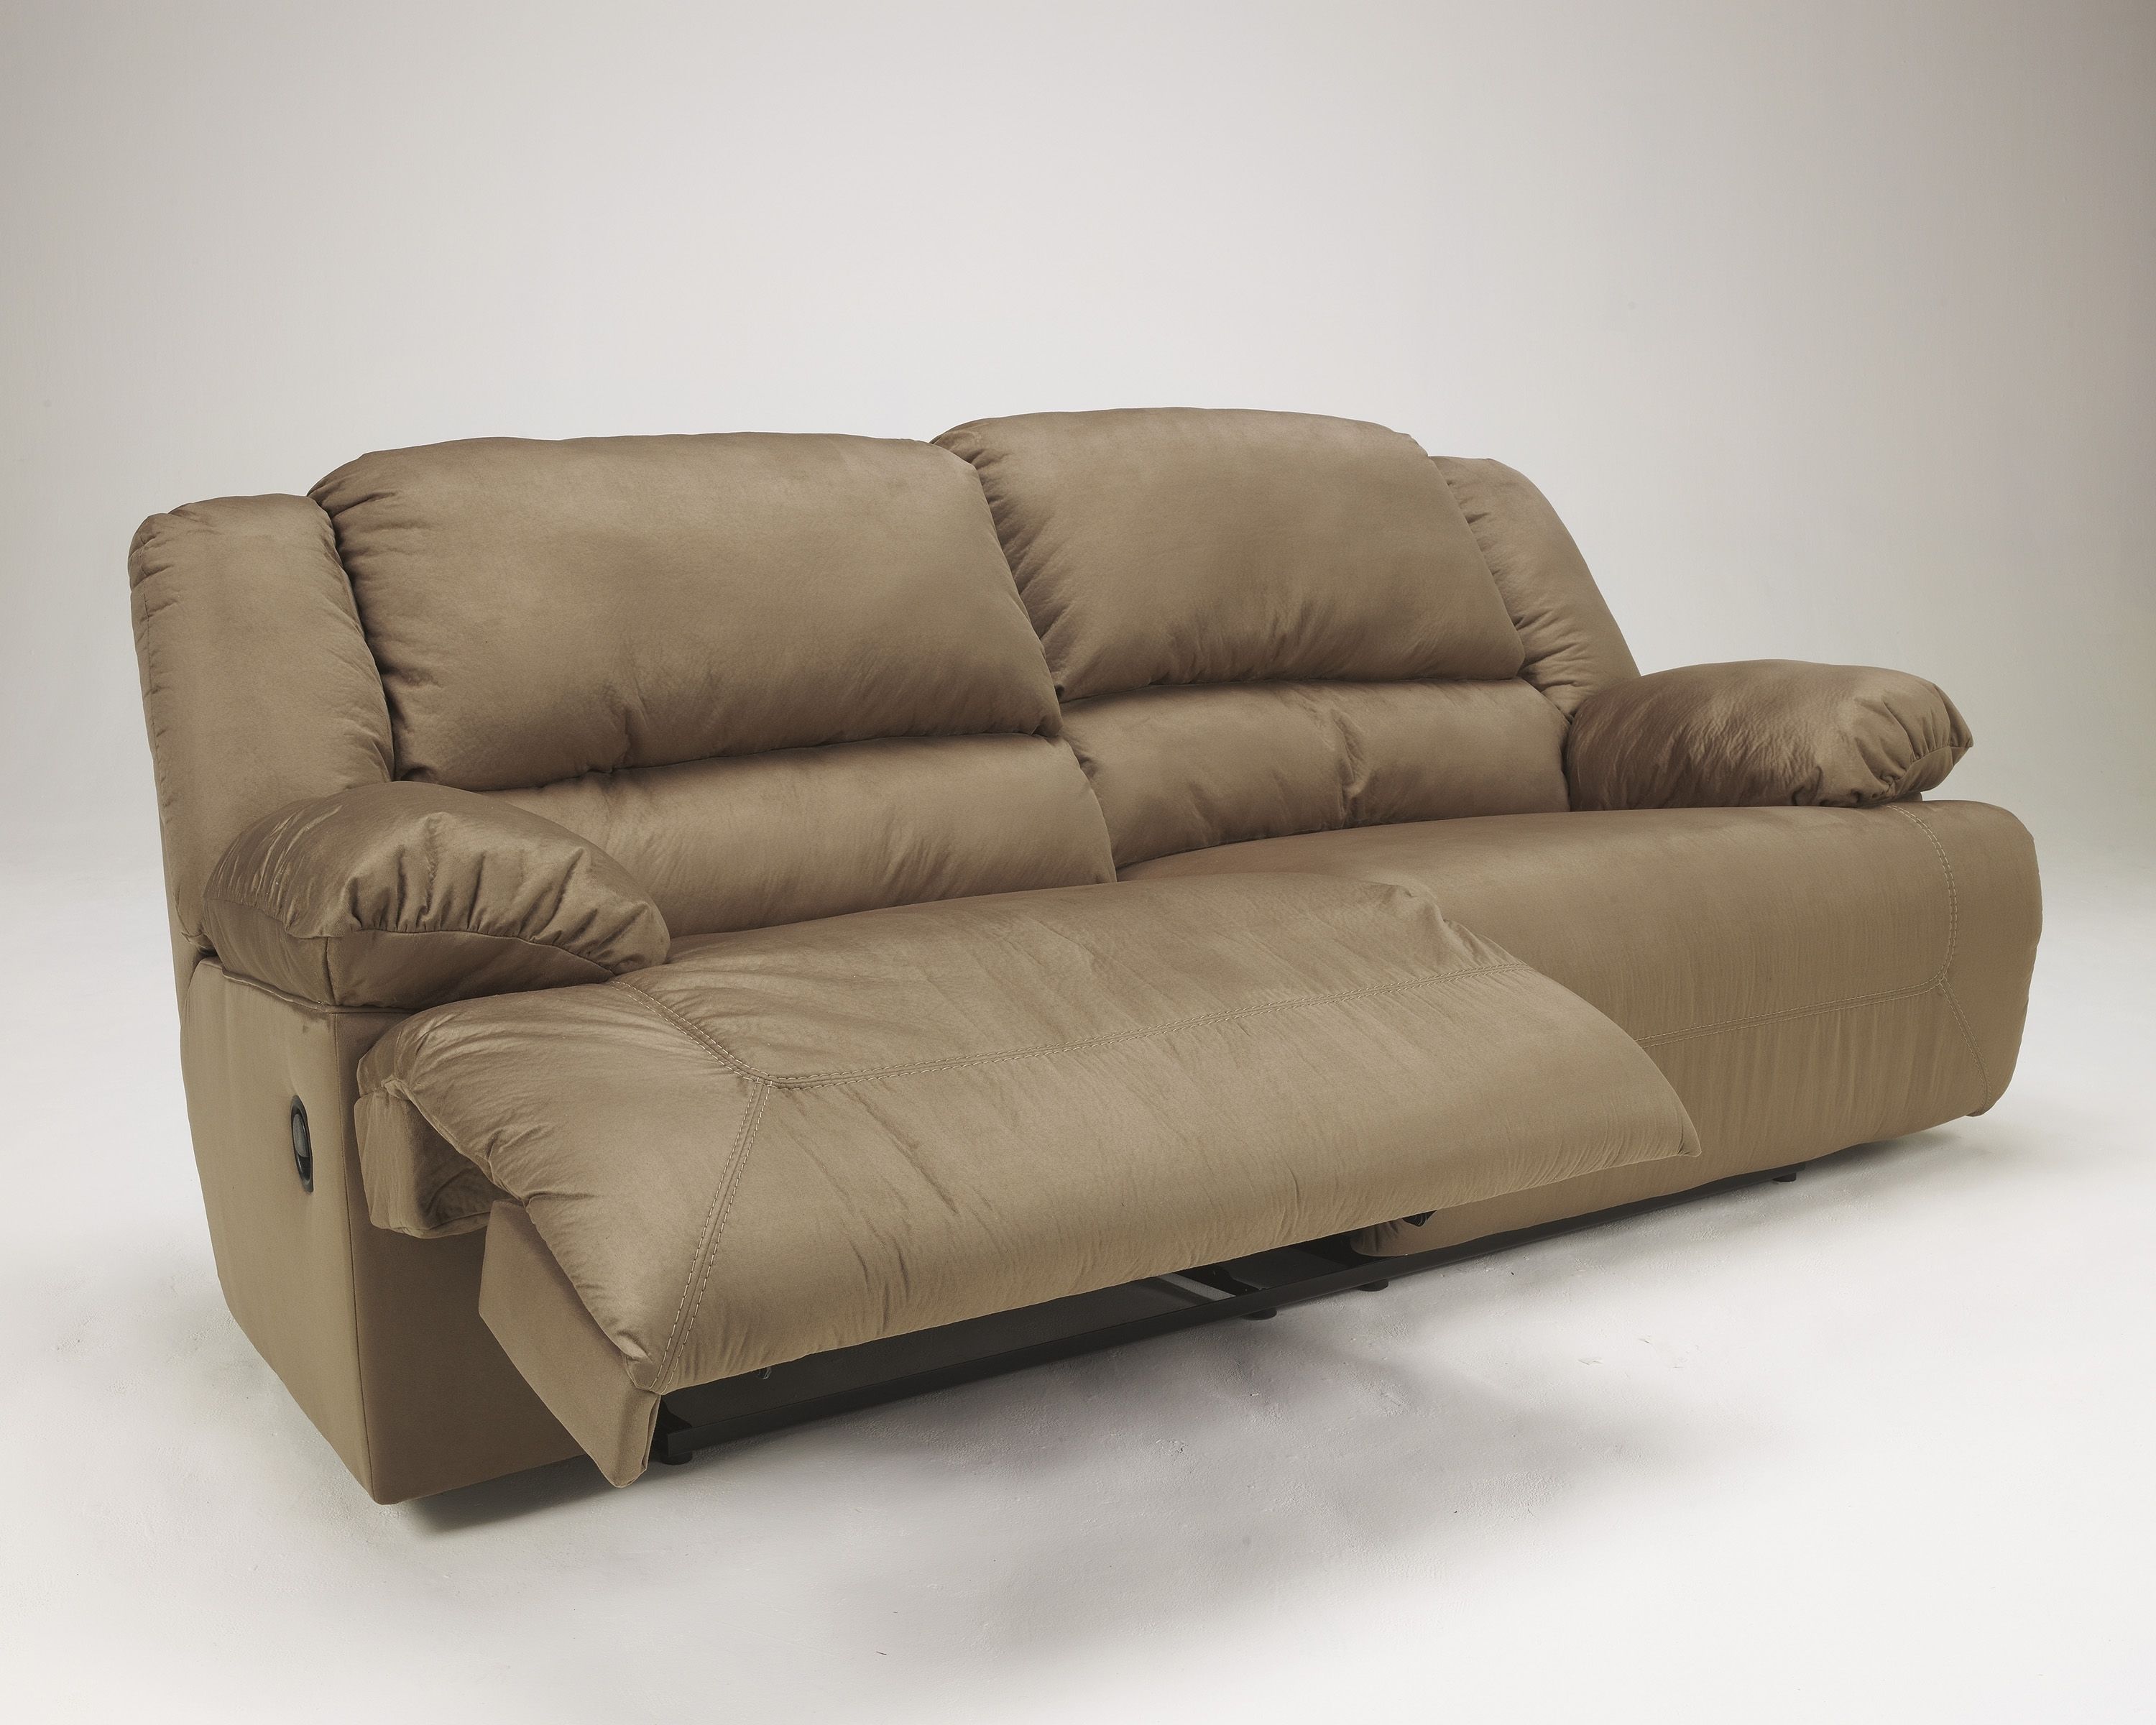 Furniture Find Your Maximum Comfort With Reclining Couches For Couch Pertaining To Aspen 2 Piece Sleeper Sectionals With Laf Chaise (View 6 of 30)